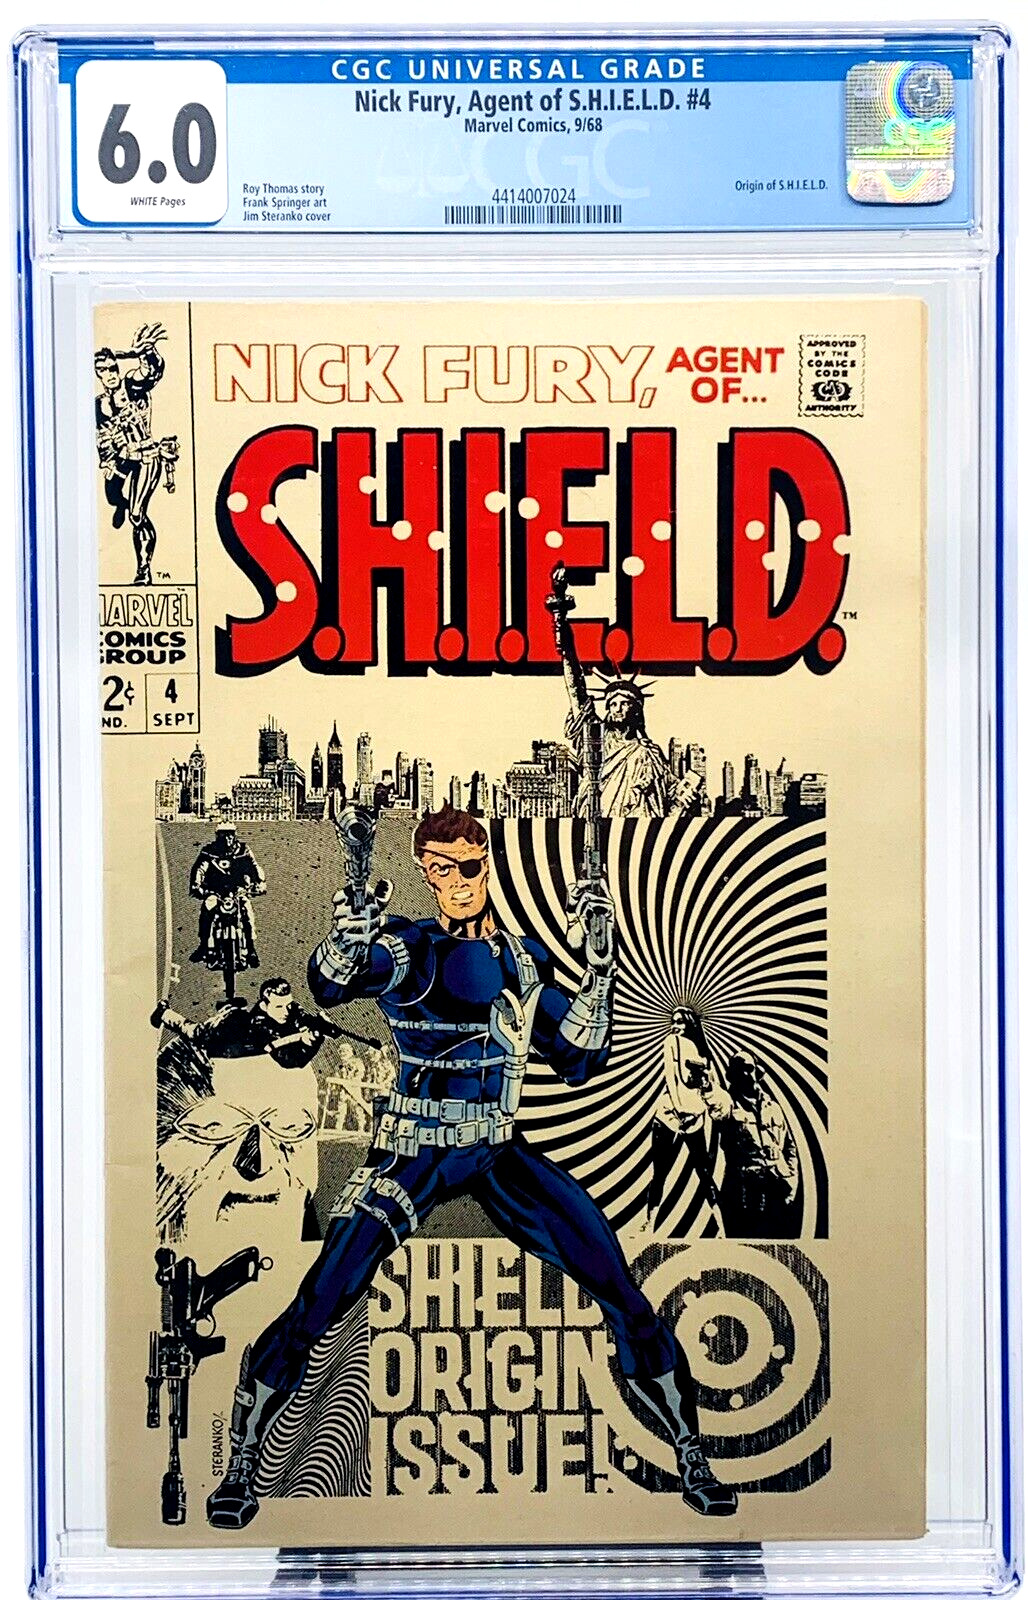 NICK FURY AGENT OF SHIELD #4 CGC 6.0 WHITE PAGE 1968 Steranko GOOD BOOK for CPR